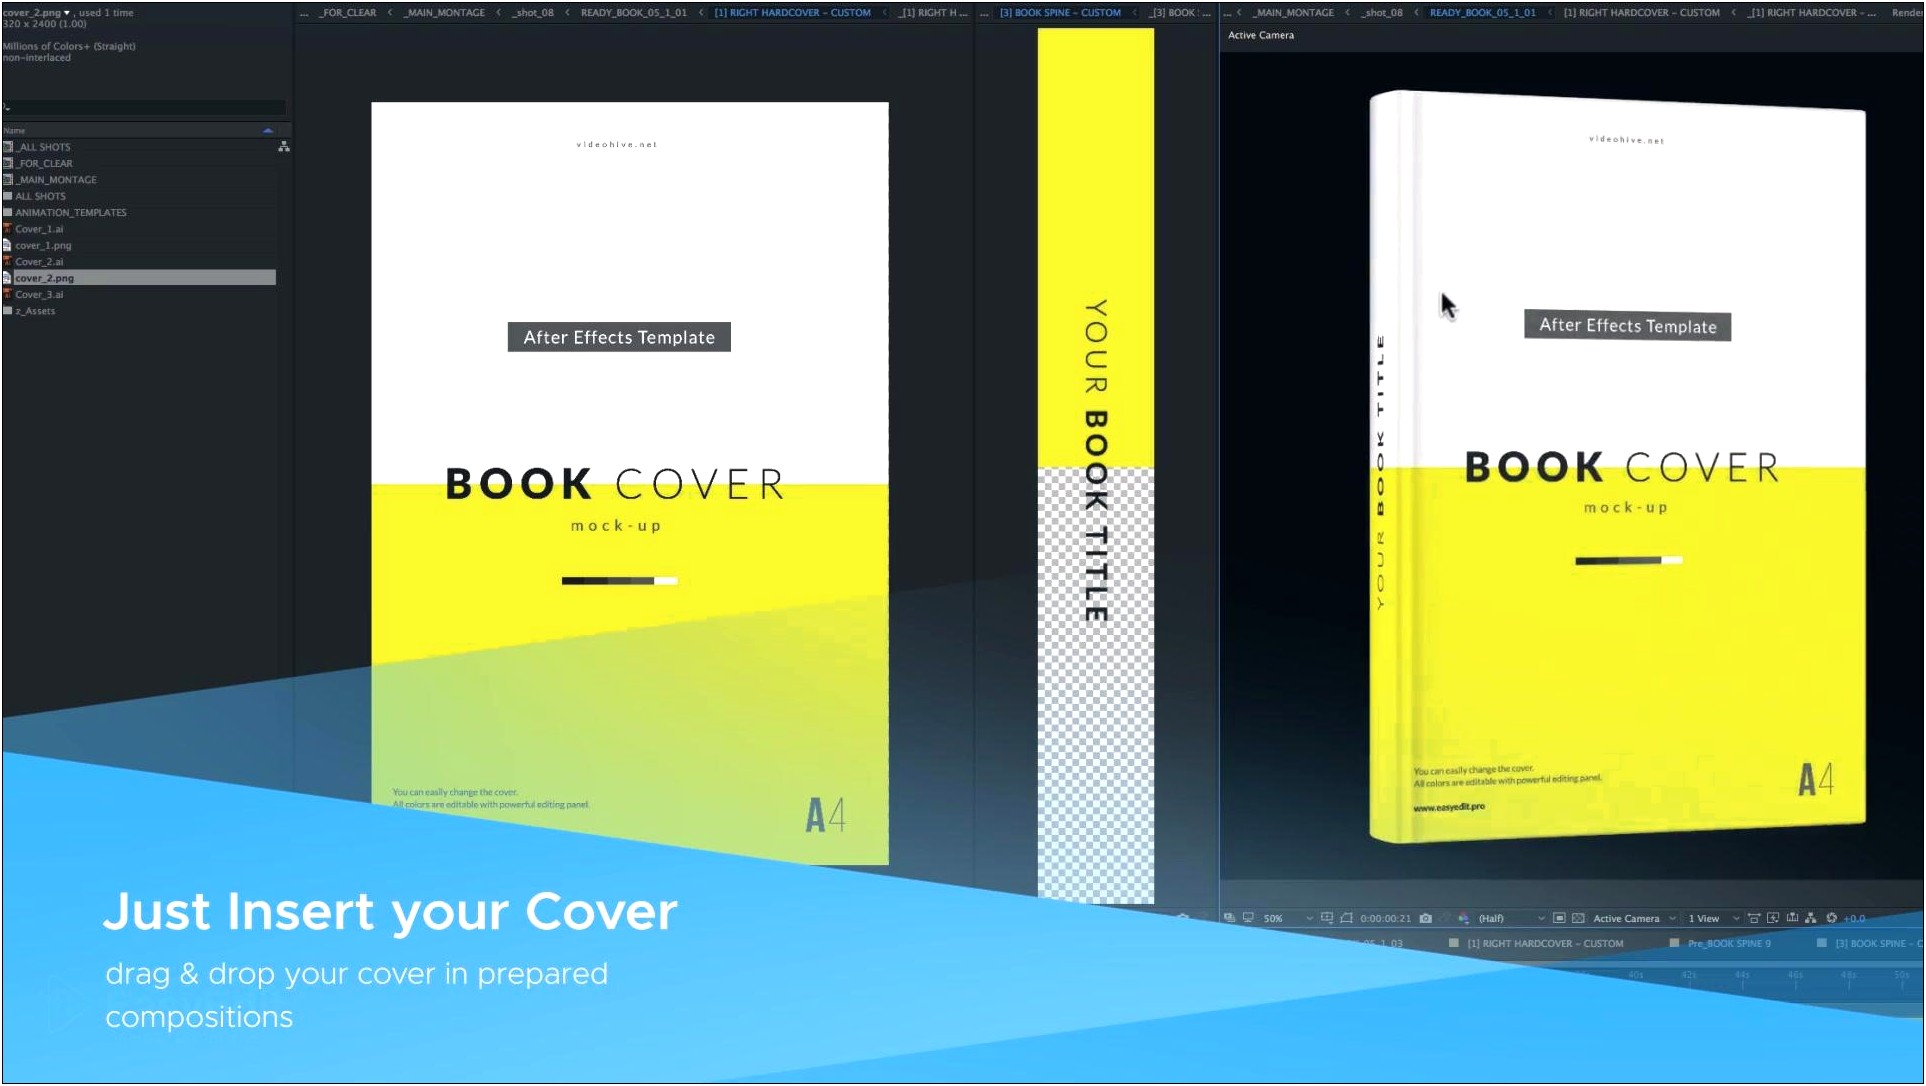 after-effects-book-template-free-download-templates-resume-designs